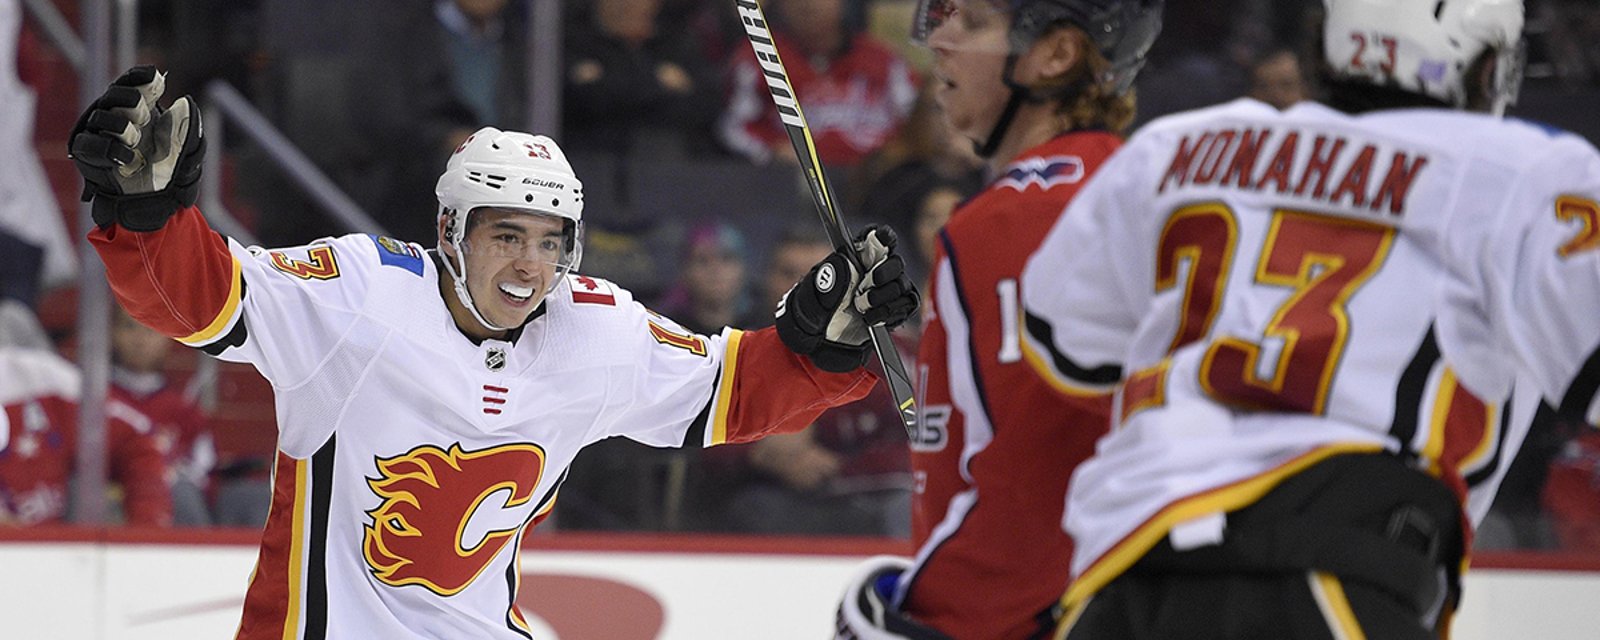 Crazy stat shows off the Flames’ third period DOMINANCE